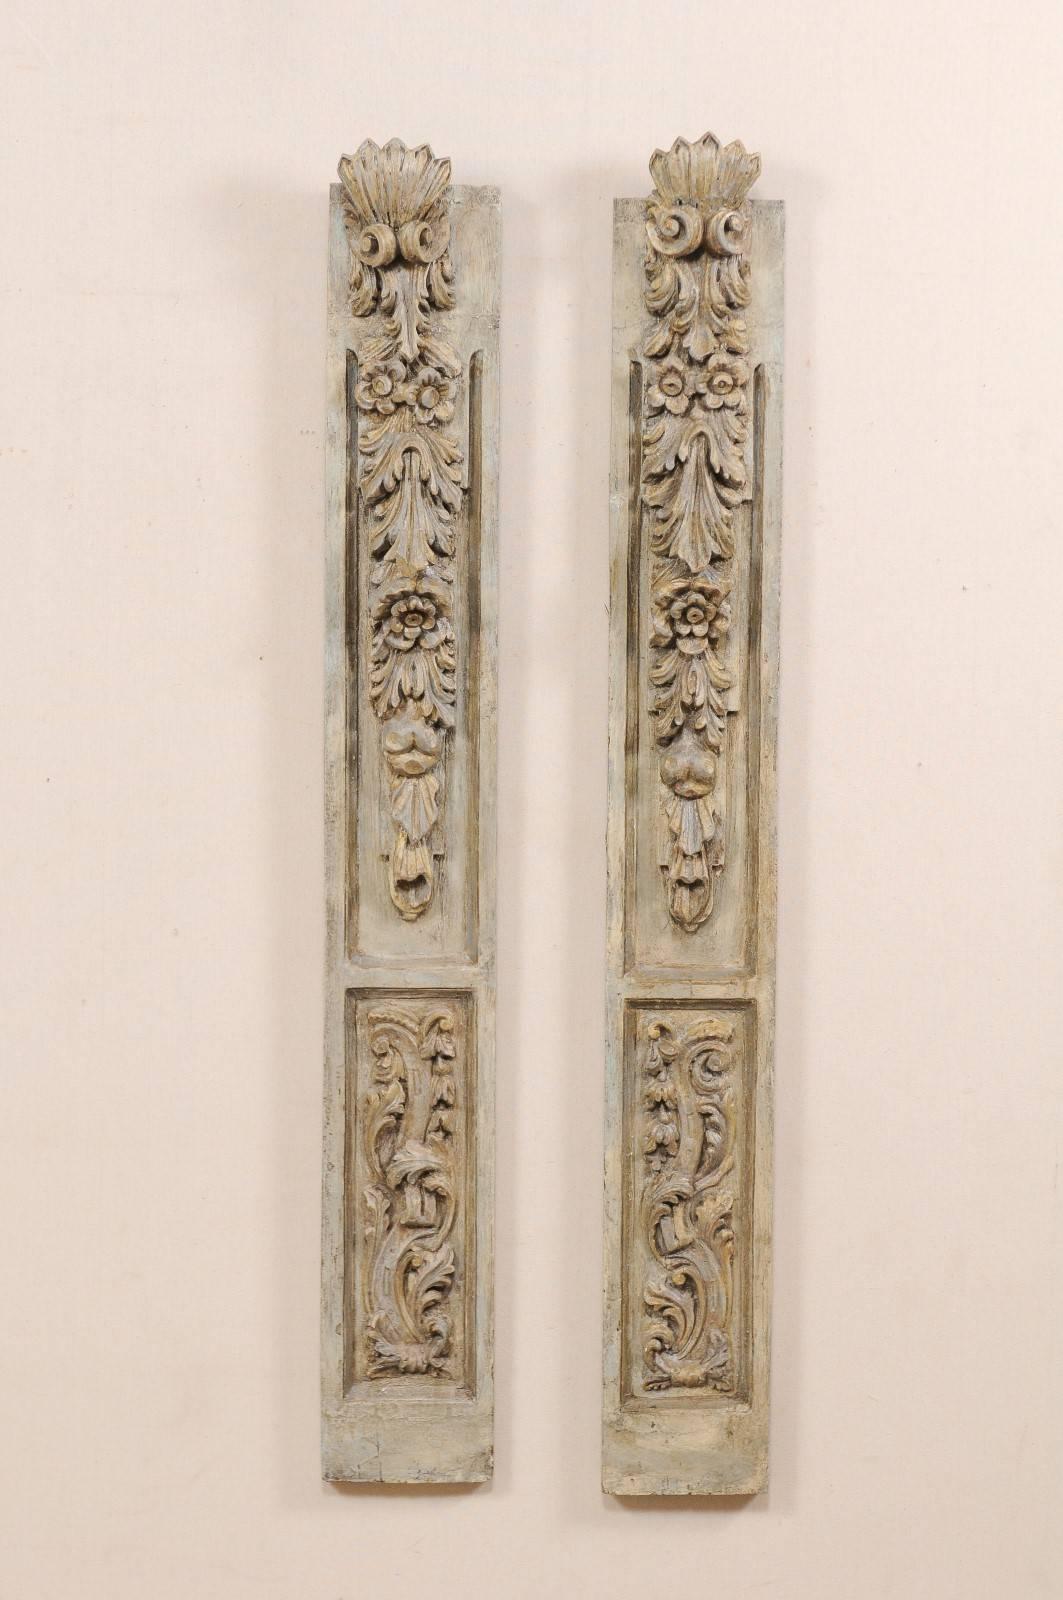 A pair of French hand-carved and painted wall plaques from the early 20th century. These antique French fragments, standing approximately 5 ft high, each having a vertically positioned rectangular-shape with three-dimensional carvings of florals,